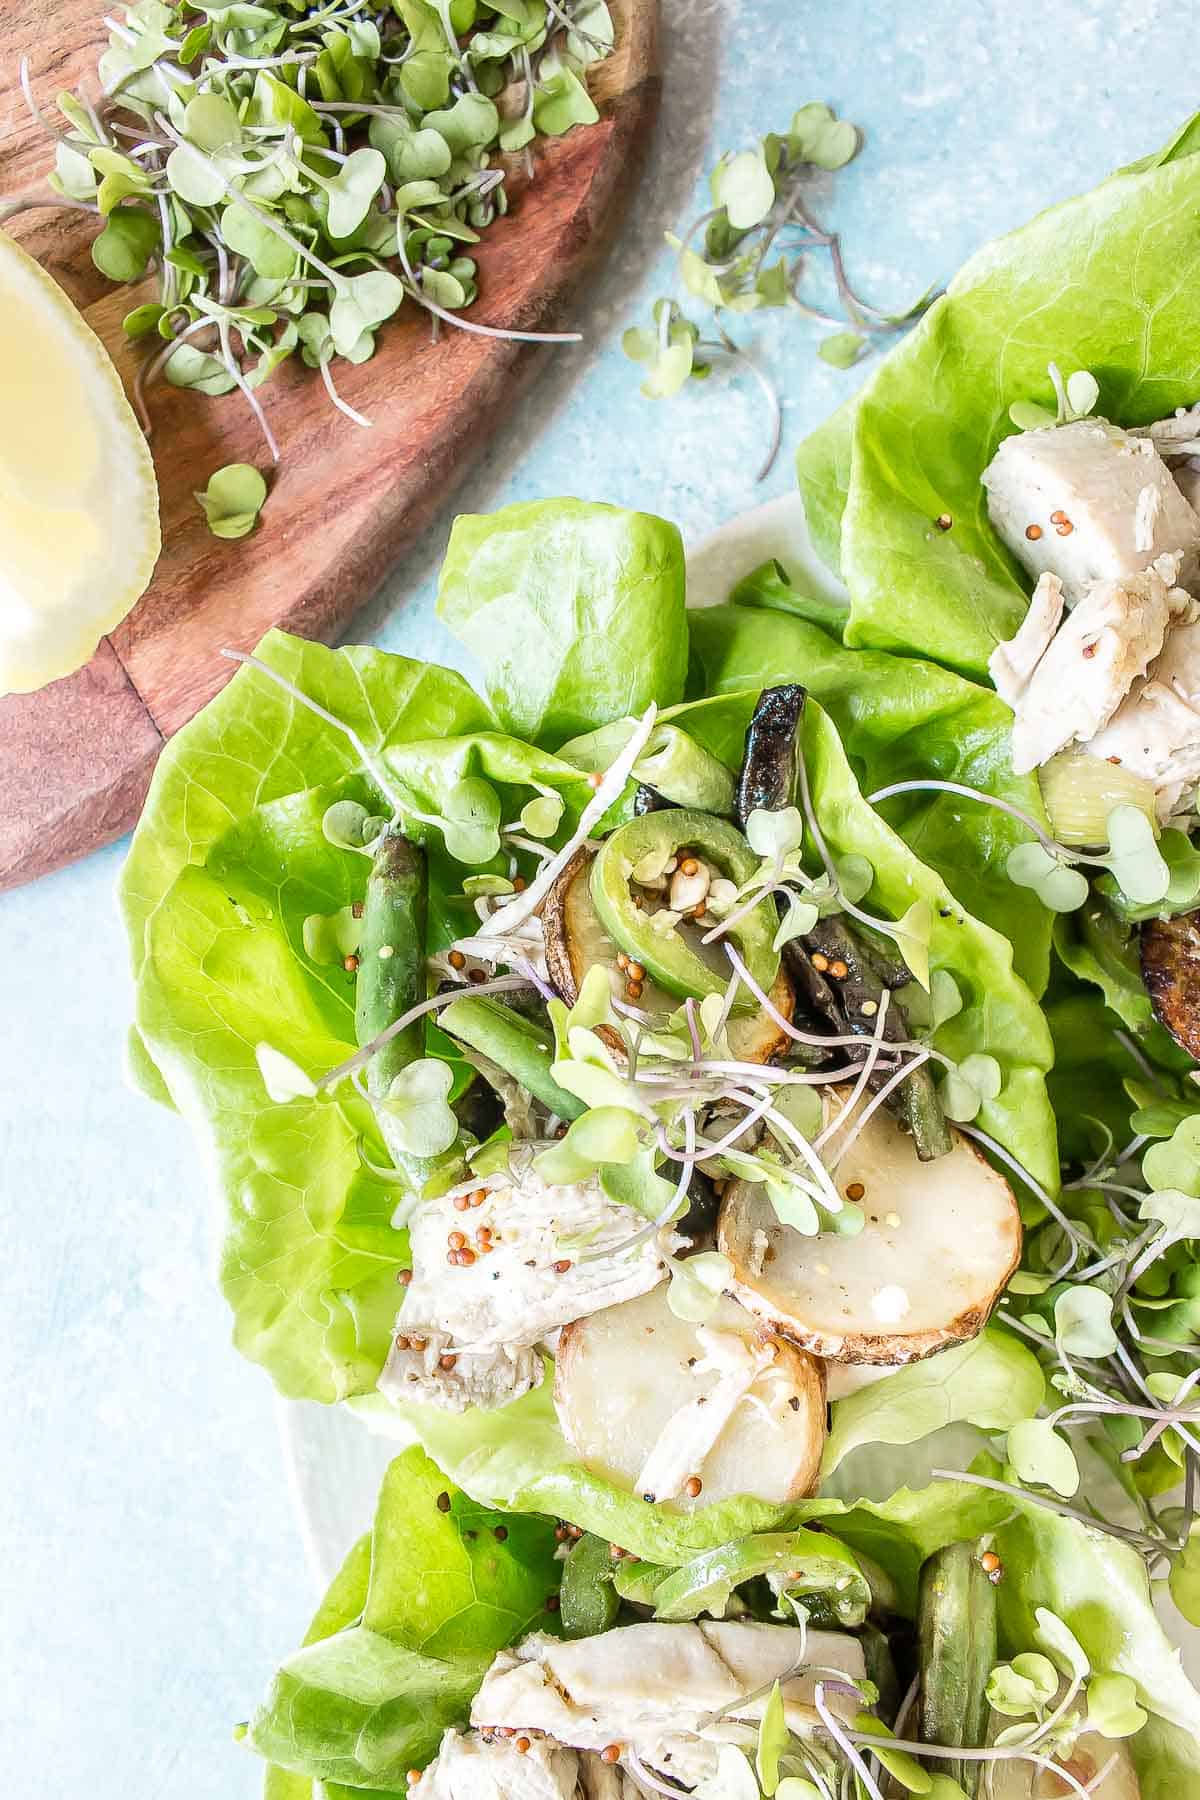 These Chicken, Potato, and Green Bean Lettuce Cups are packed full of flavor from the charred green onions and jalapenos to the tangy mustard dressing.